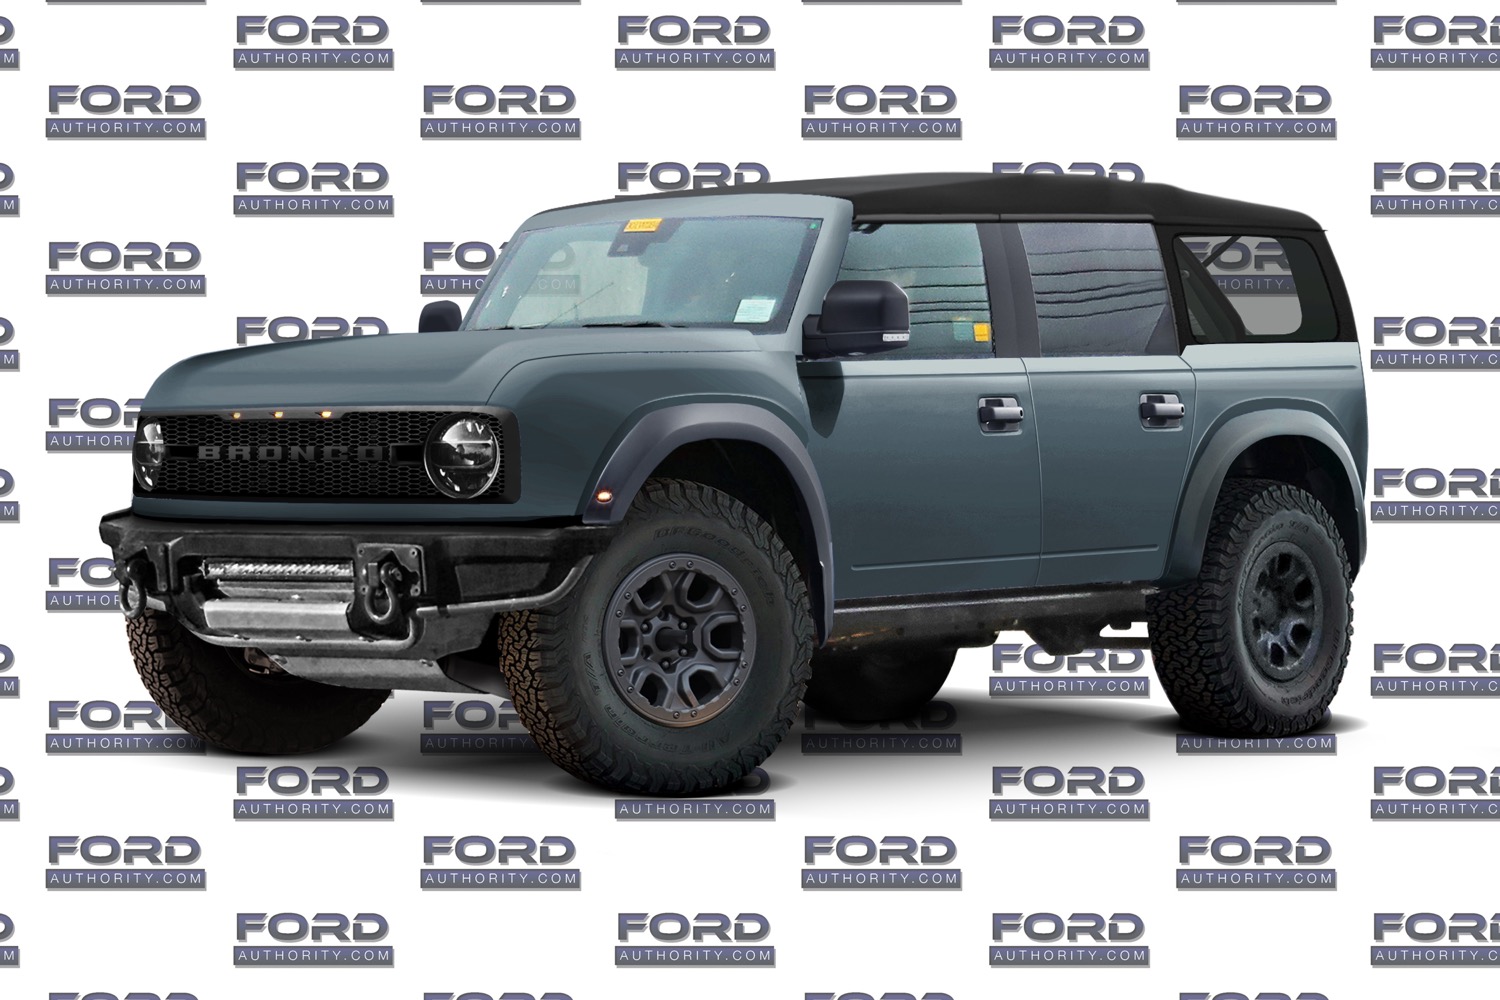 2021 Ford Bronco Badlands Four Door Renderings 007 Gray Blue Ford Authority